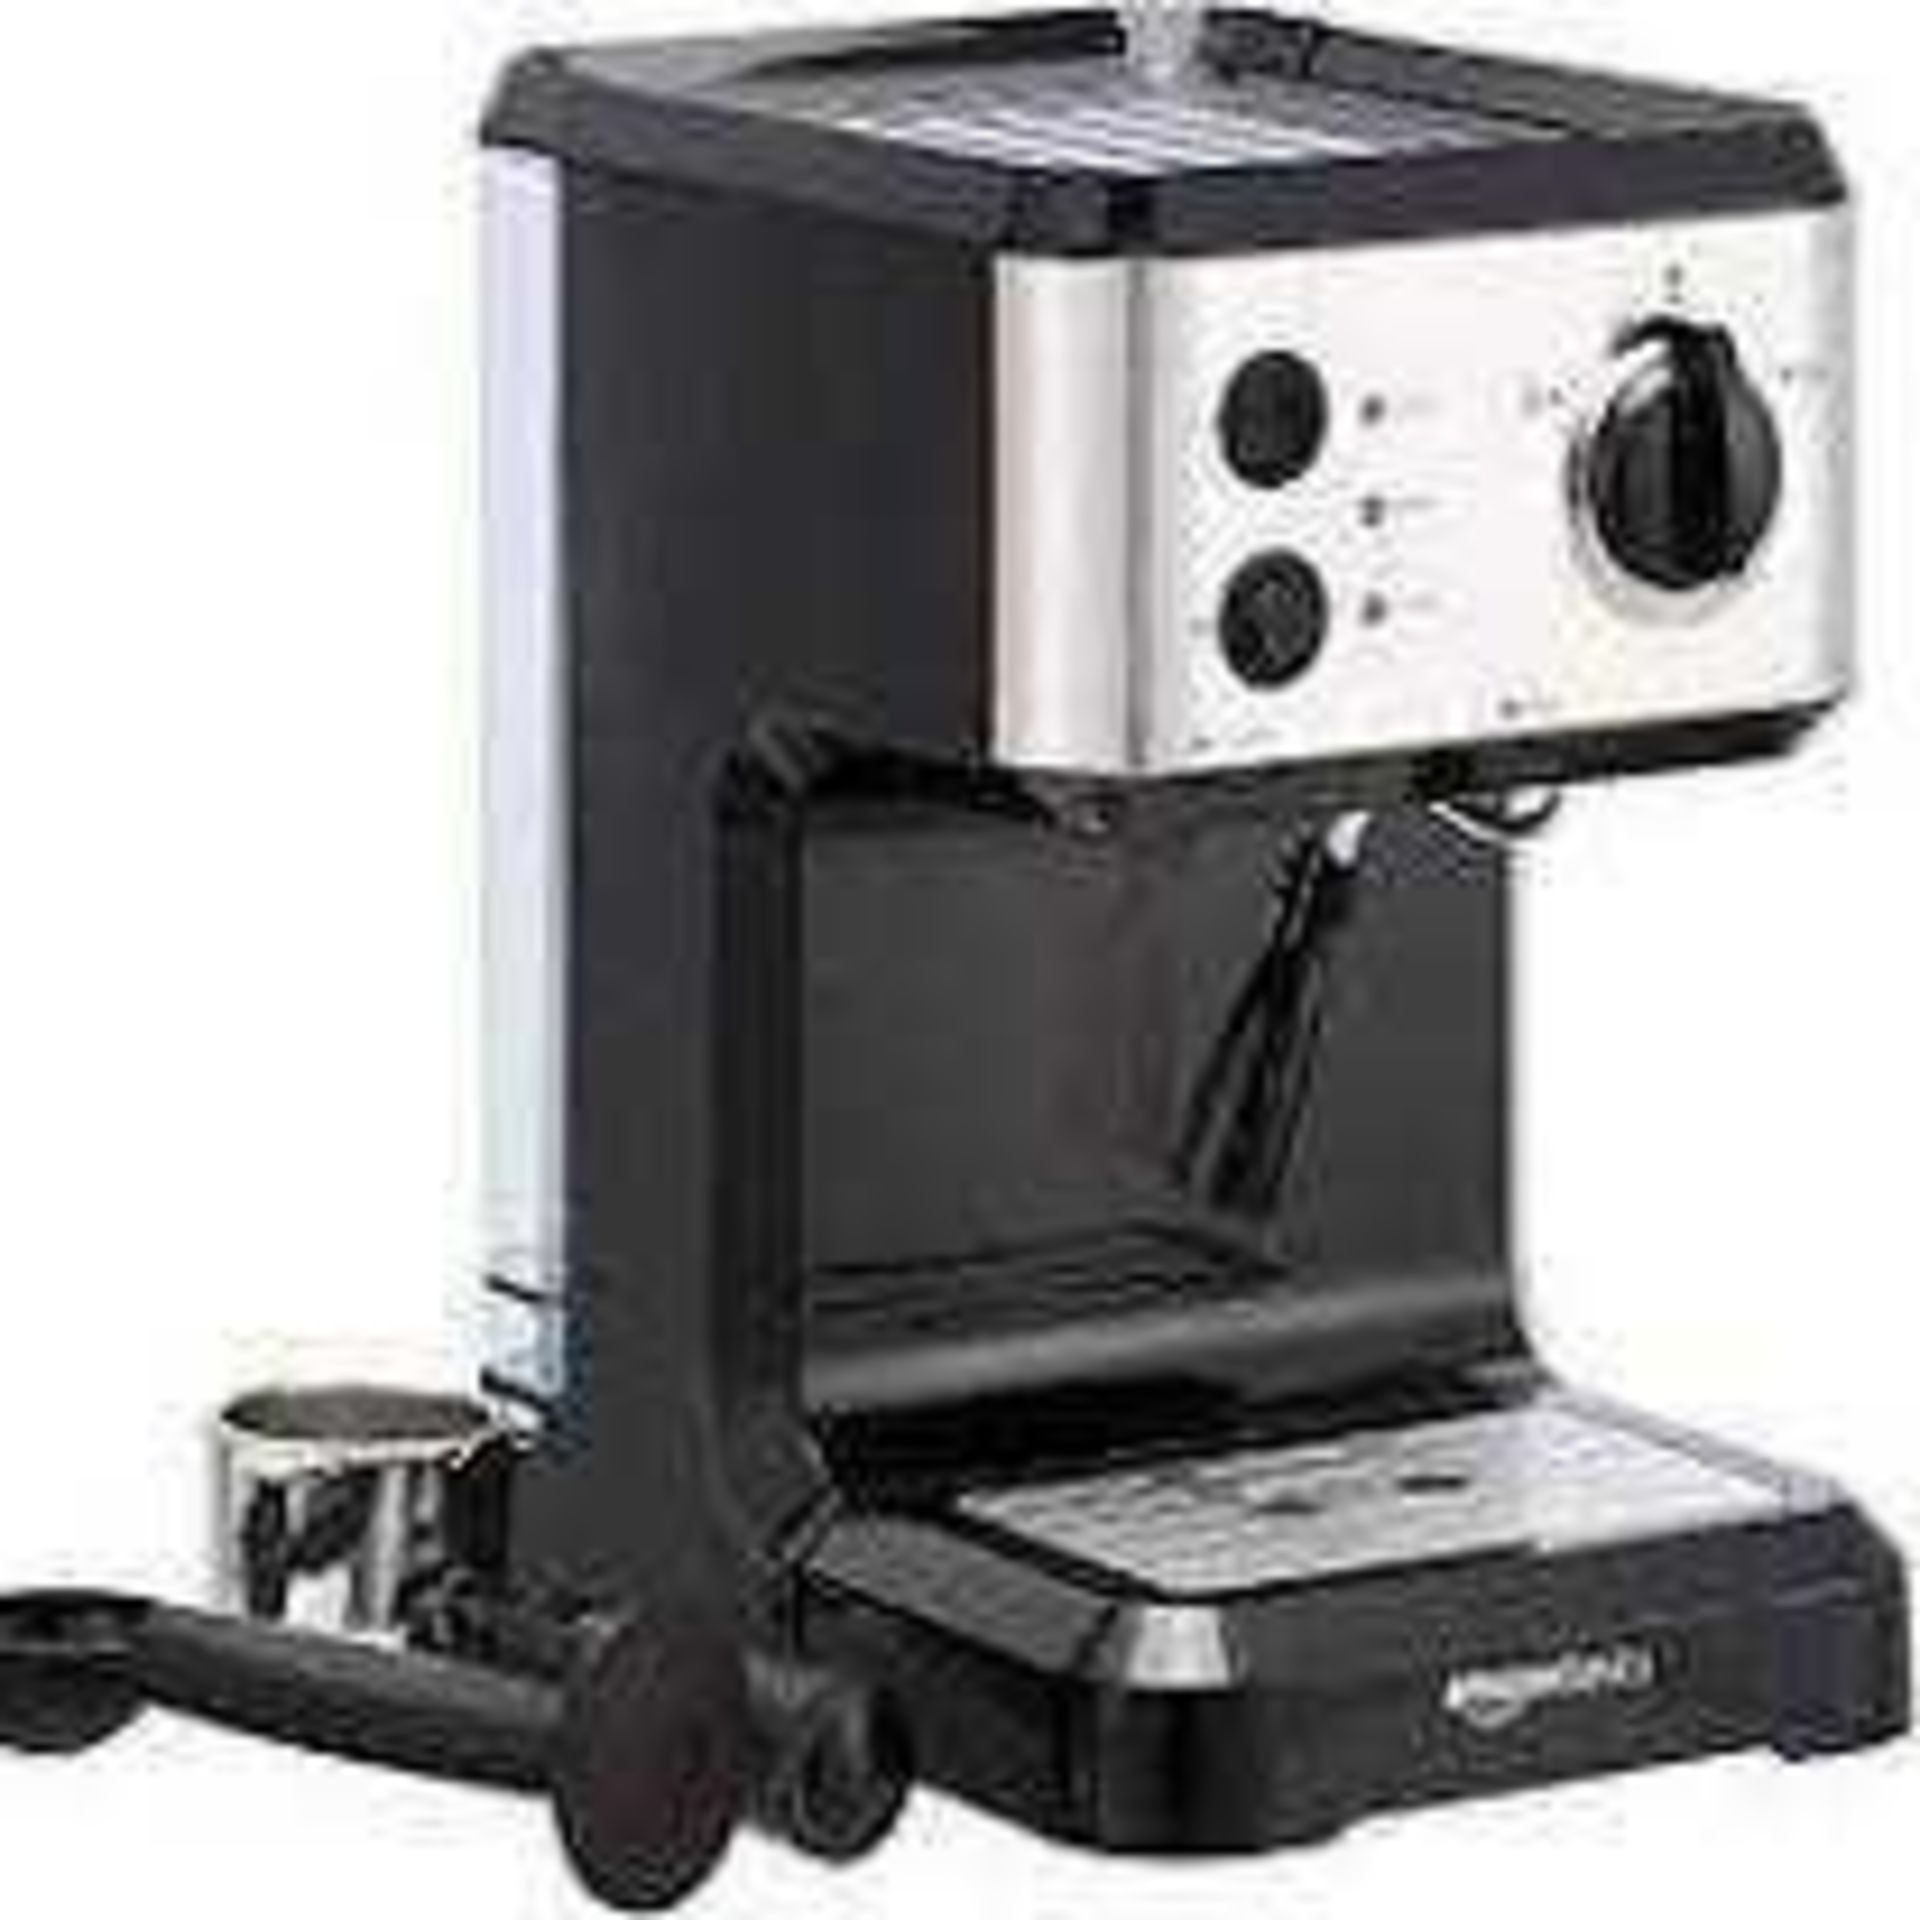 RRP £100 Boxed Amazon Basics Espresso Coffee Machine With Milk Frother (Good Condition)(Wr) (